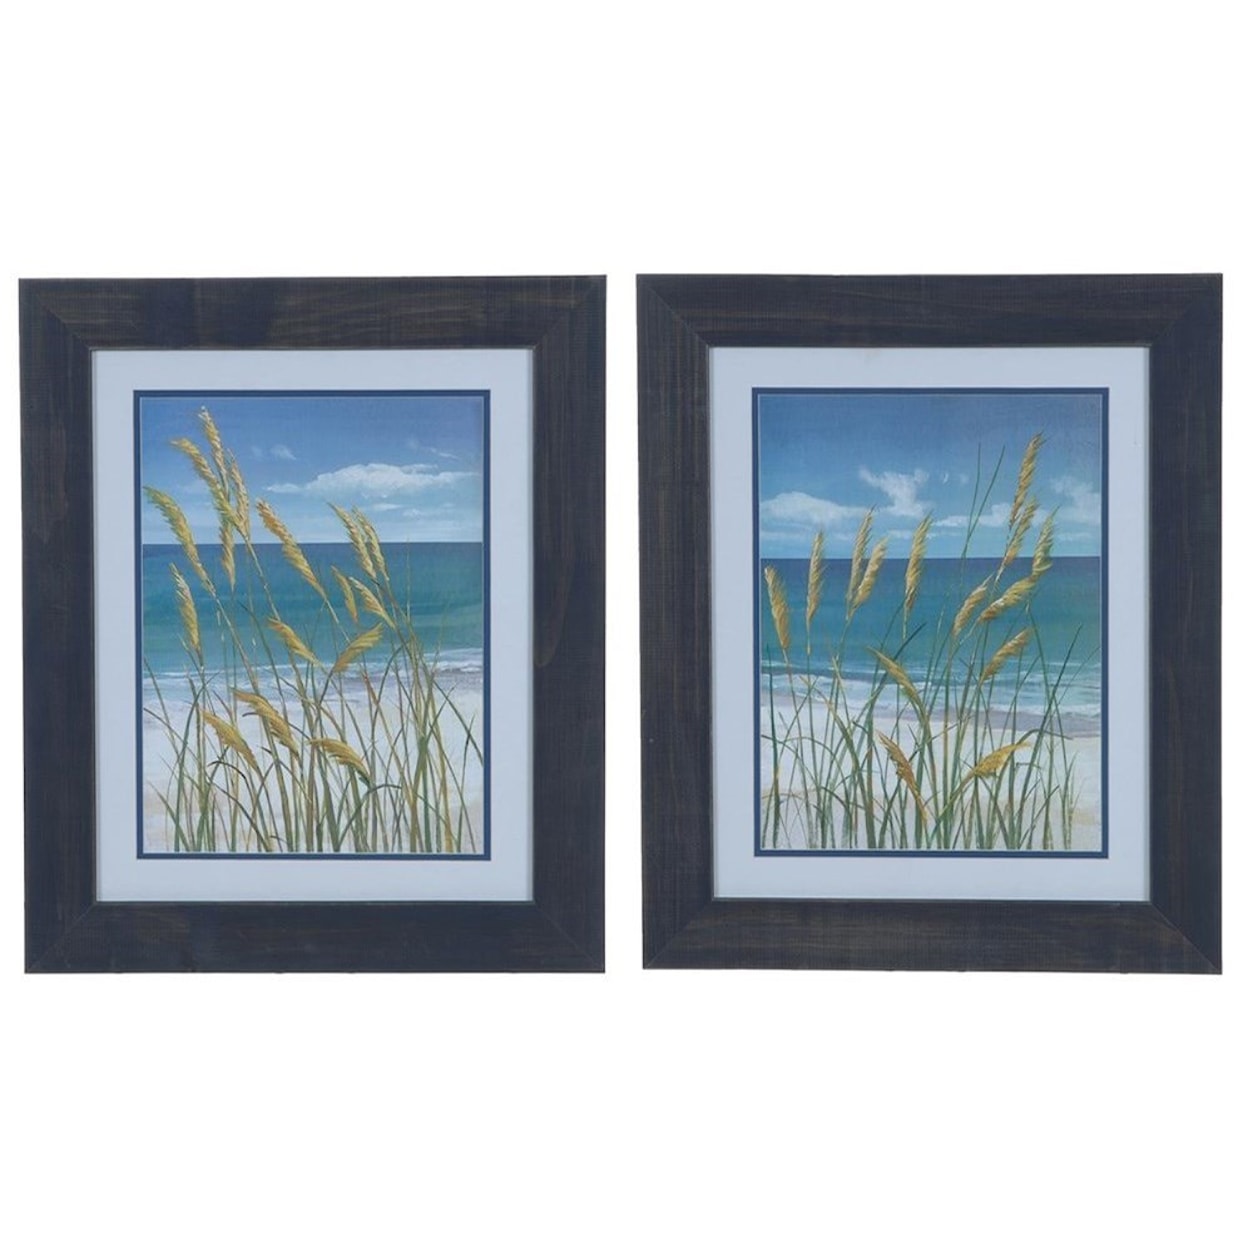 Crestview Collection Prints and Paintings Summer Breeze 1 & 2 (Set)